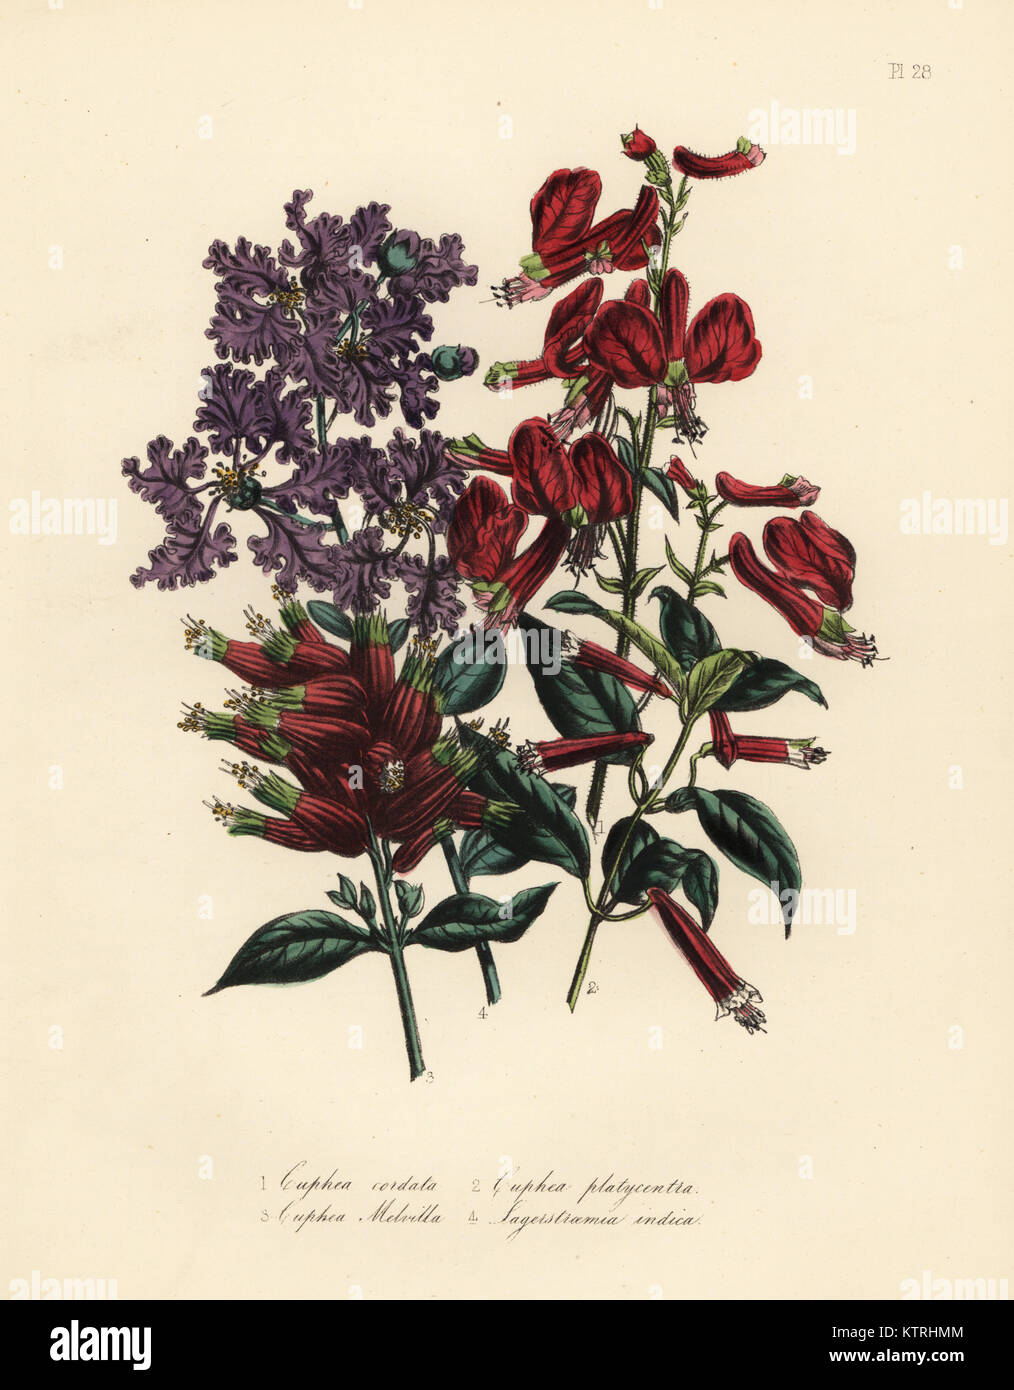 Heart-shaped cuphea, Cuphea cordata, broad-centred cuphea, Cuphea platycentra, General Melville's cuphea, Cuphea melvilla, and Indian lagerstroemia, Lagerstroemia indica. Handfinished chromolithograph by Henry Noel Humphreys after an illustration by Jane Loudon from Mrs. Jane Loudon's Ladies Flower Garden or Ornamental Greenhouse Plants, William S. Orr, London, 1849. Stock Photo